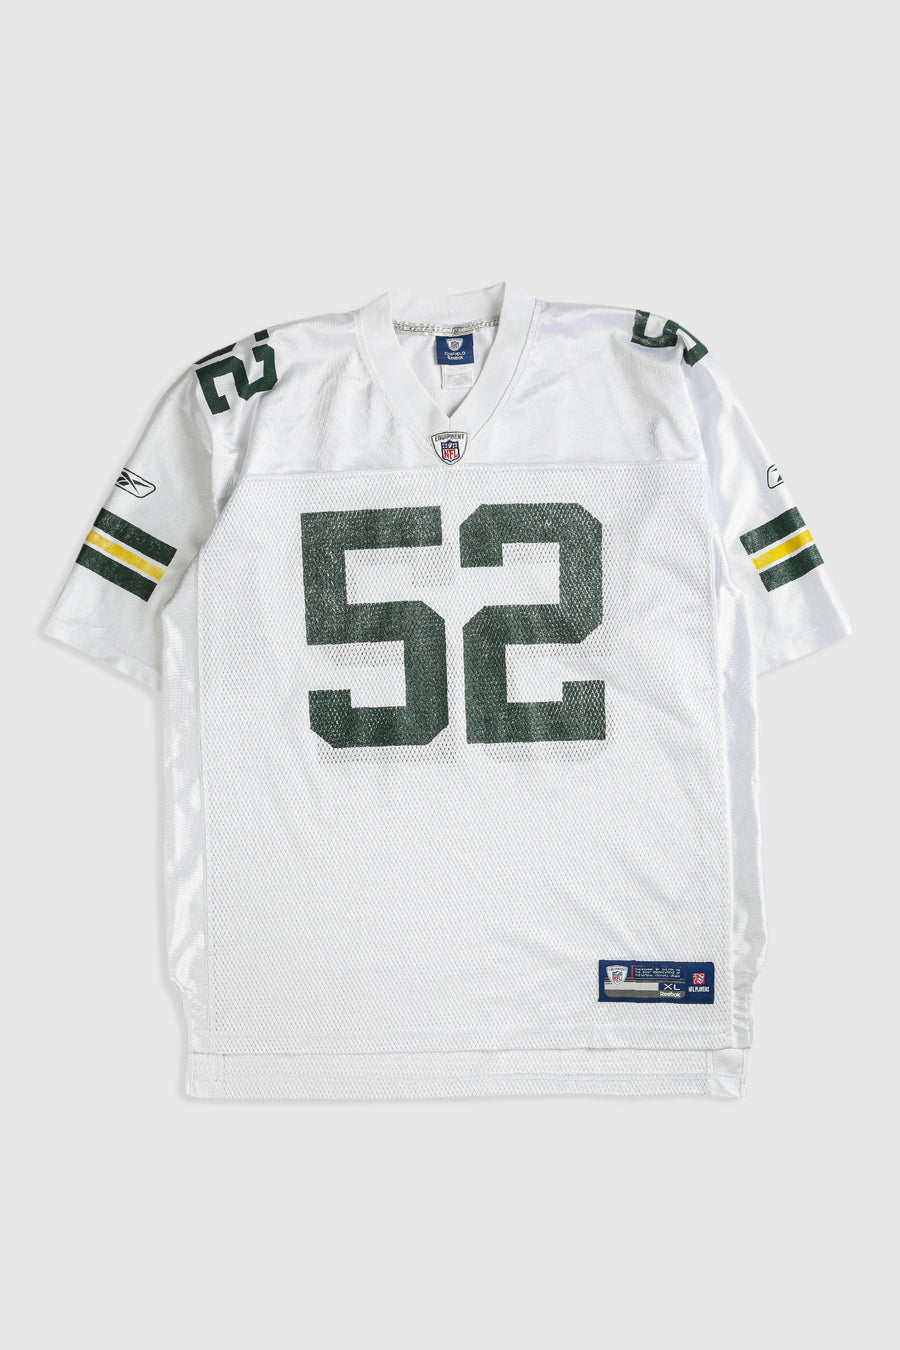 Vintage Packers NFL Jersey - XL